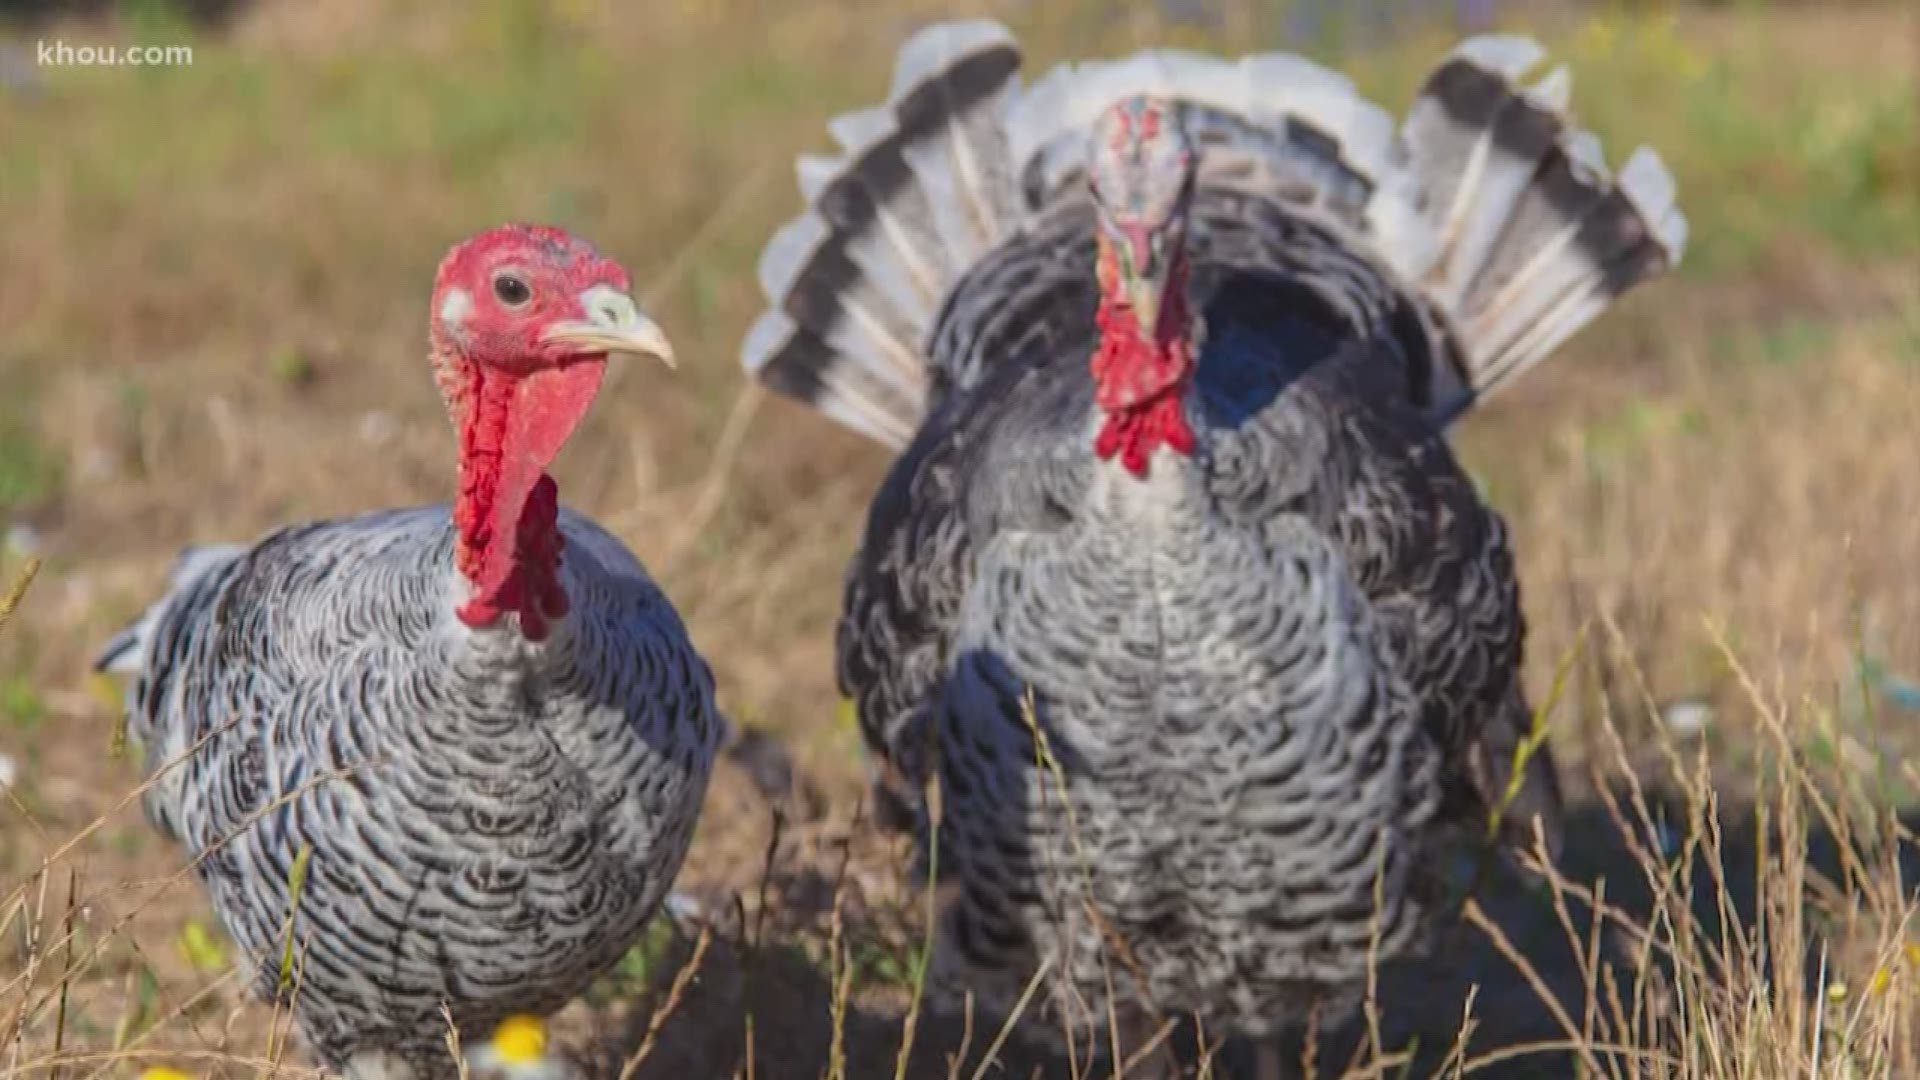 Turkey Day is the only time of the year when it's socially acceptable to eat, and only eat. The National Turkey Federation says 88 percent of Americans will take in a little turkey on Thanksgiving.